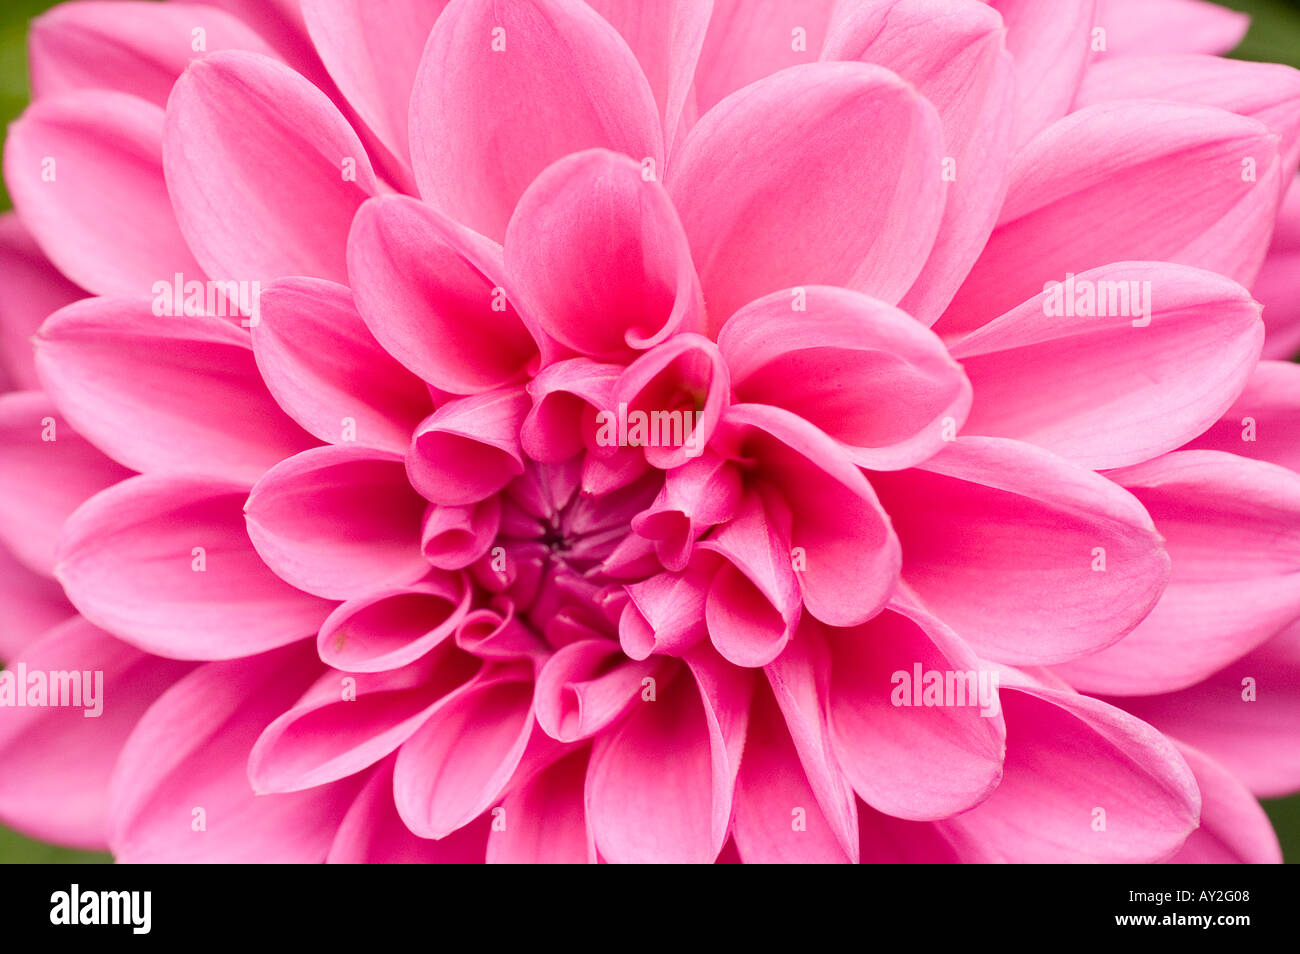 Close up of a pink coloured Dahlia flower in full bloom Stock Photo